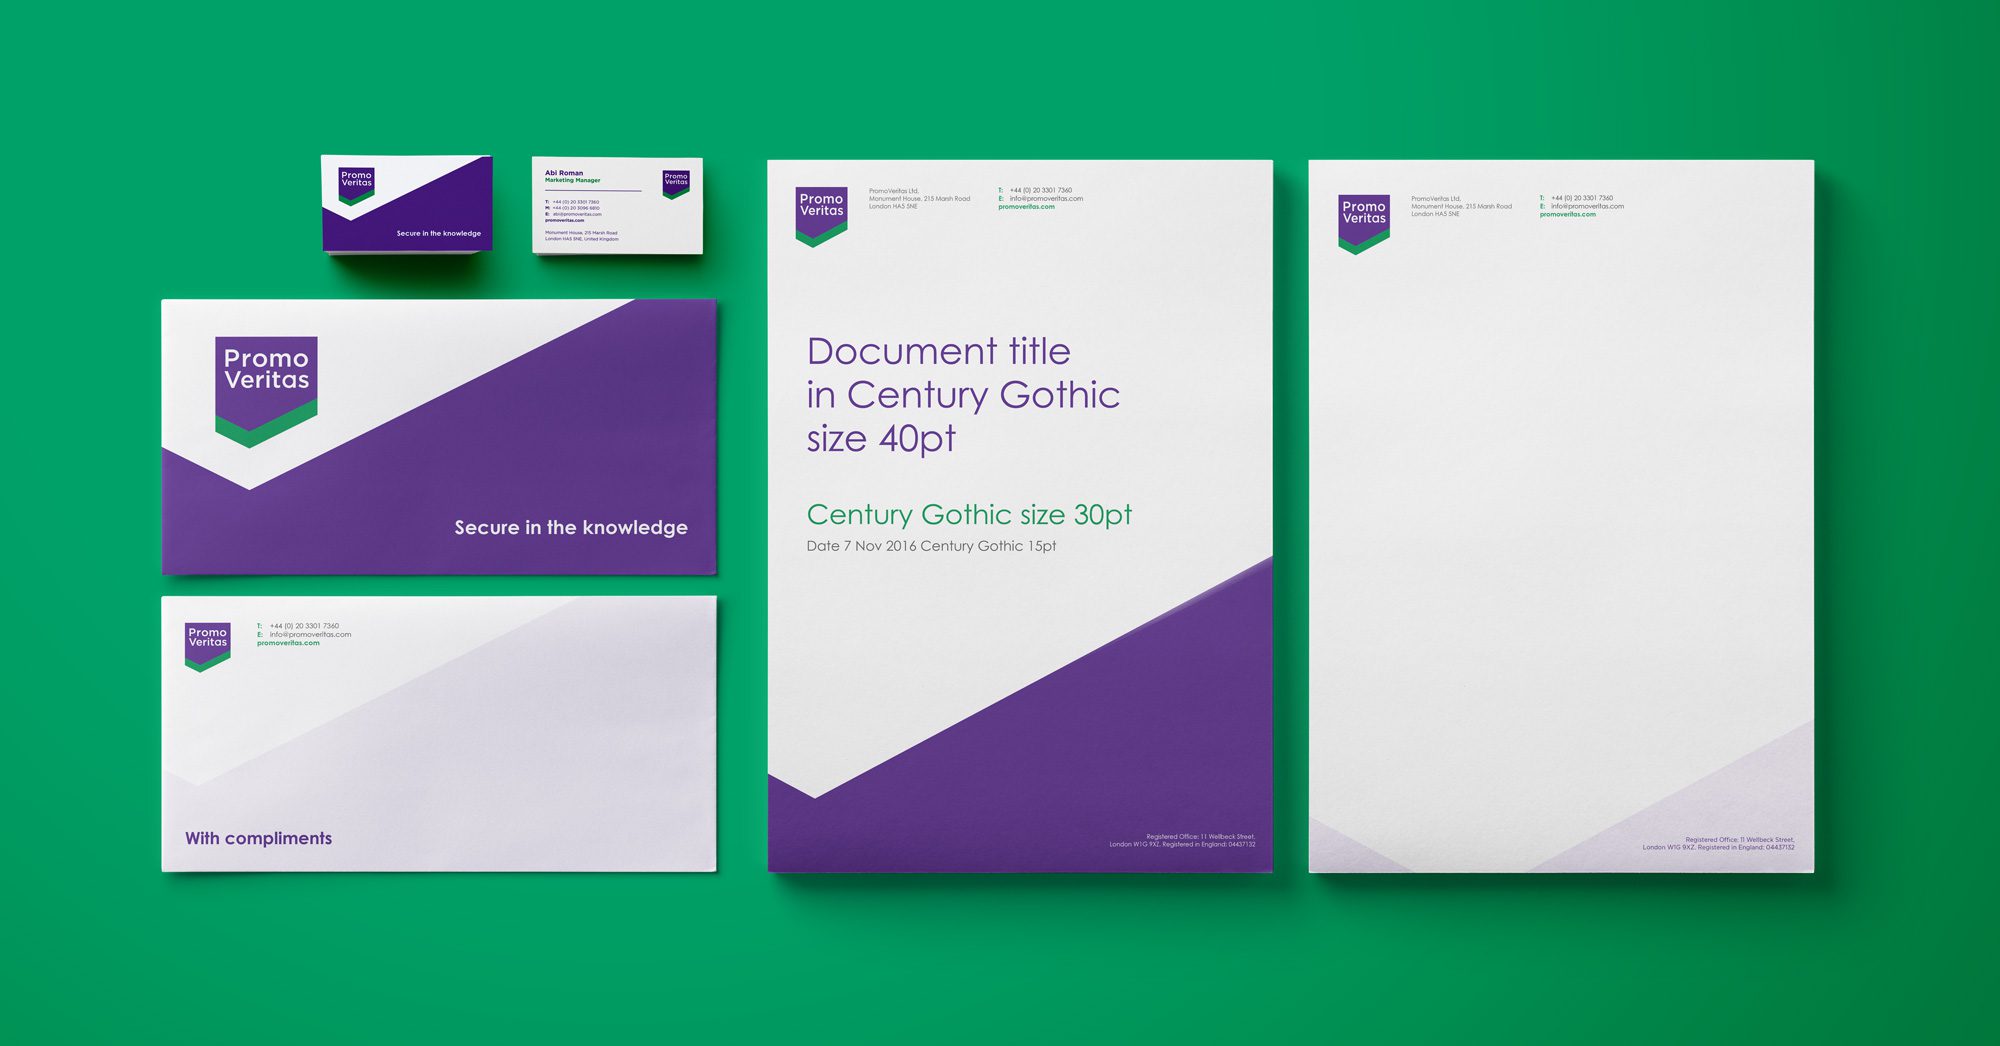 Stationery design and identity for PromoVeritas